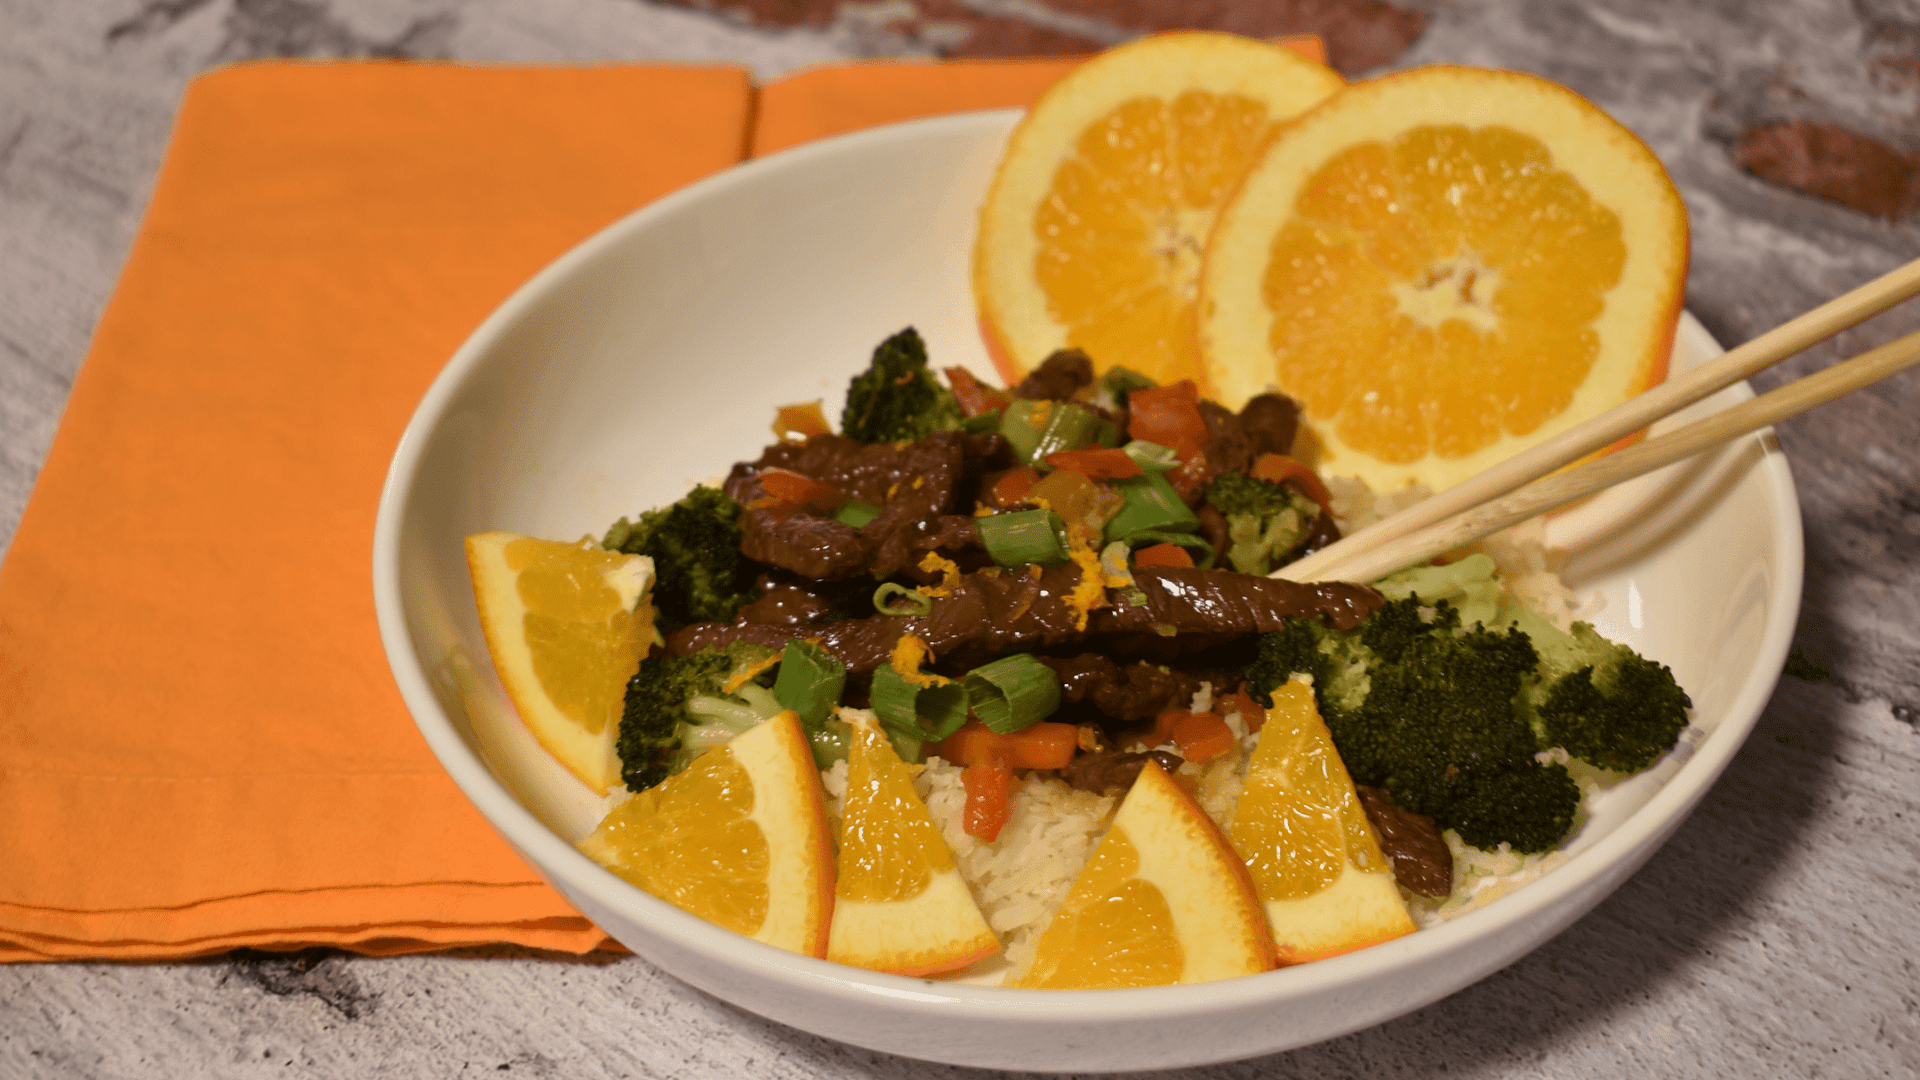 A bowl with beef, carrots, red peppers, and broccoli